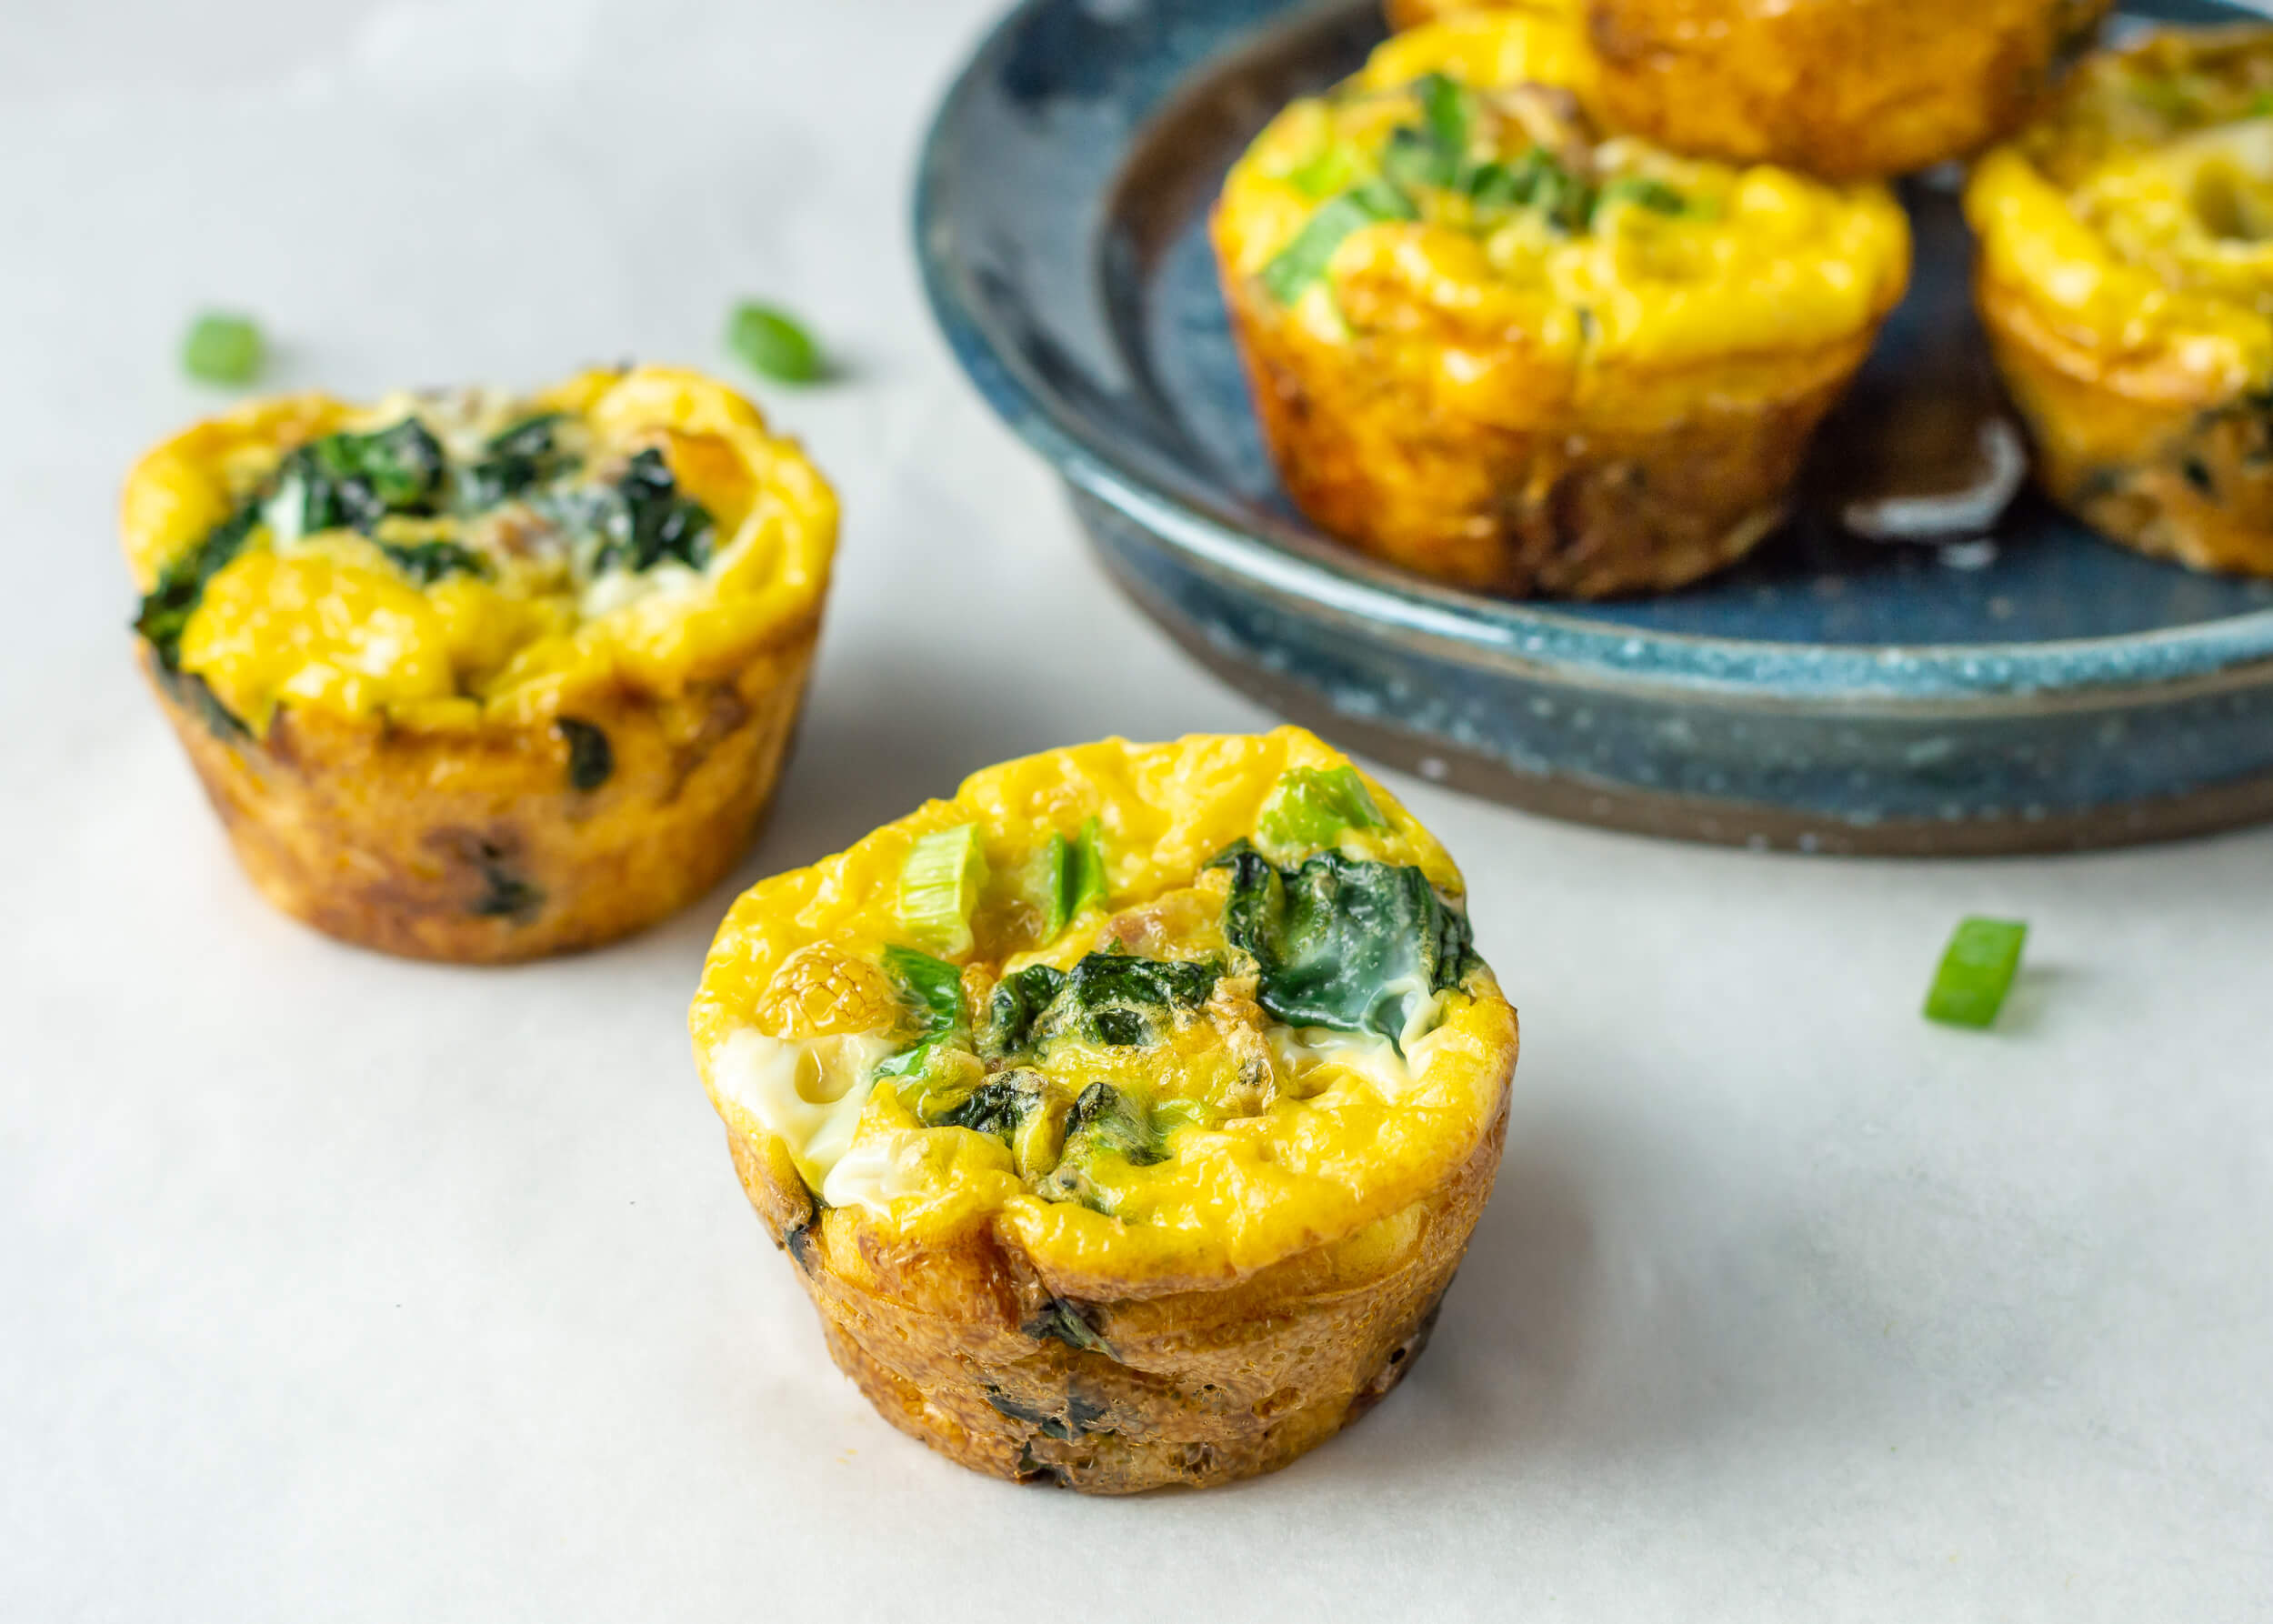 20 Freezer Friendly Meal Ideas: Spinach & Sausage Egg Muffins